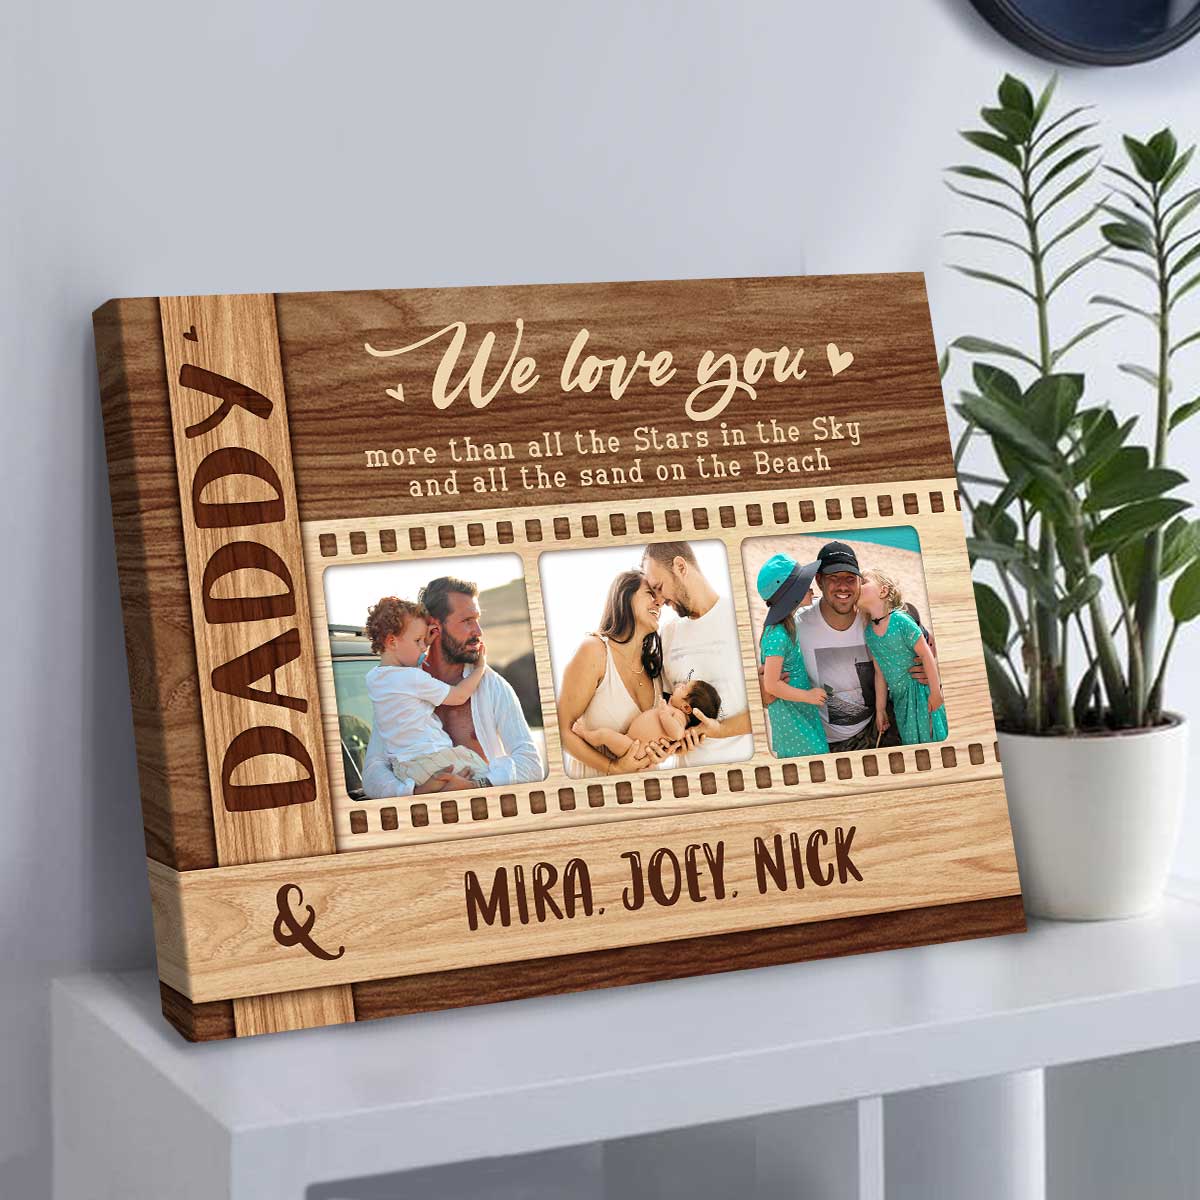 https://benicee.com/wp-content/uploads/2022/09/Personalized-Dad-Canvas-We-Love-You-Dad-Custom-Photo-Gifts-Dad-Christmas-Gifts-4.jpg